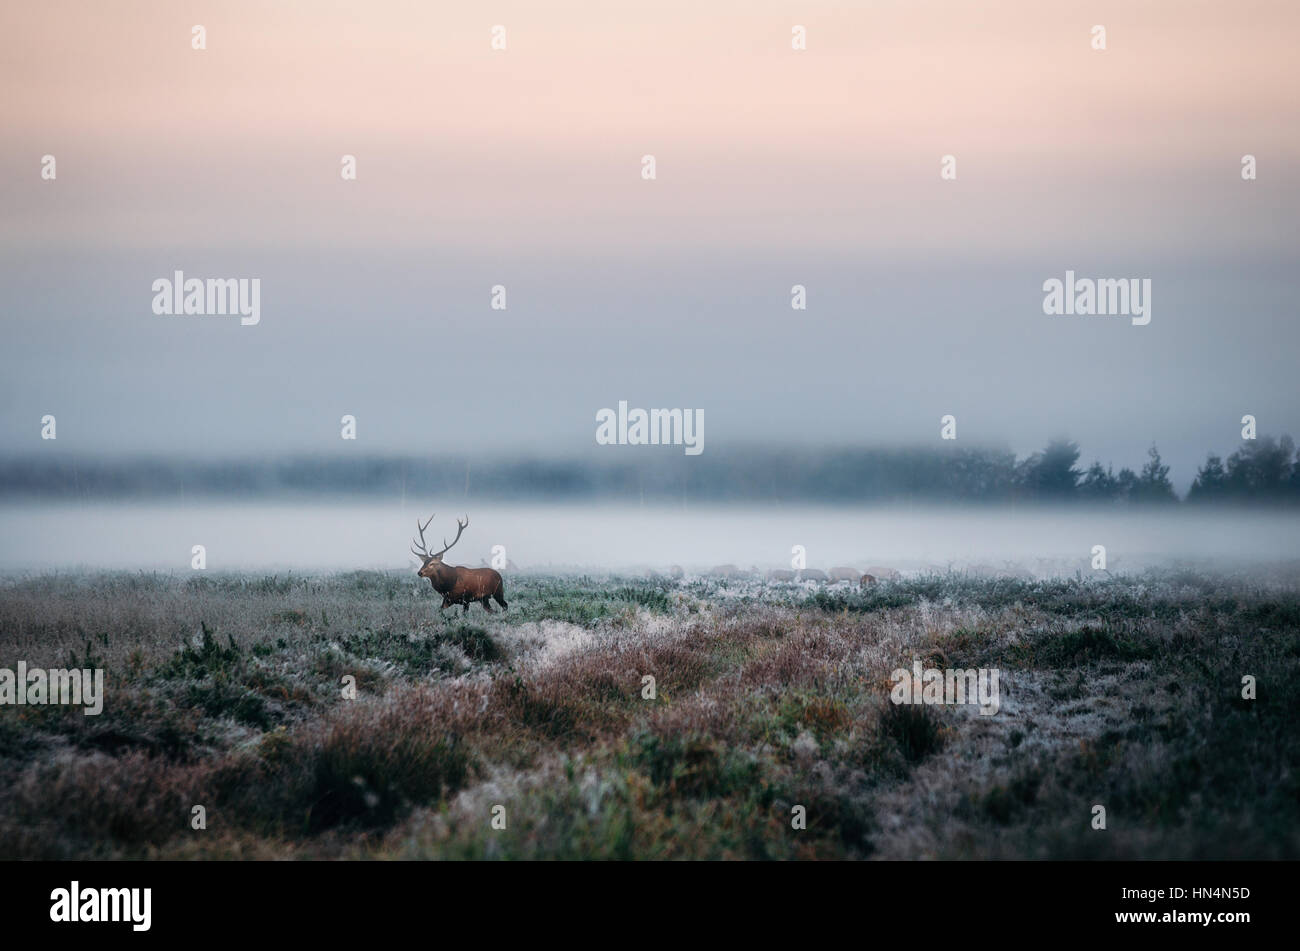 Beautiful red deer stag on the snowy field near the foggy misty forest landscape in autumn in Belarus. Stock Photo